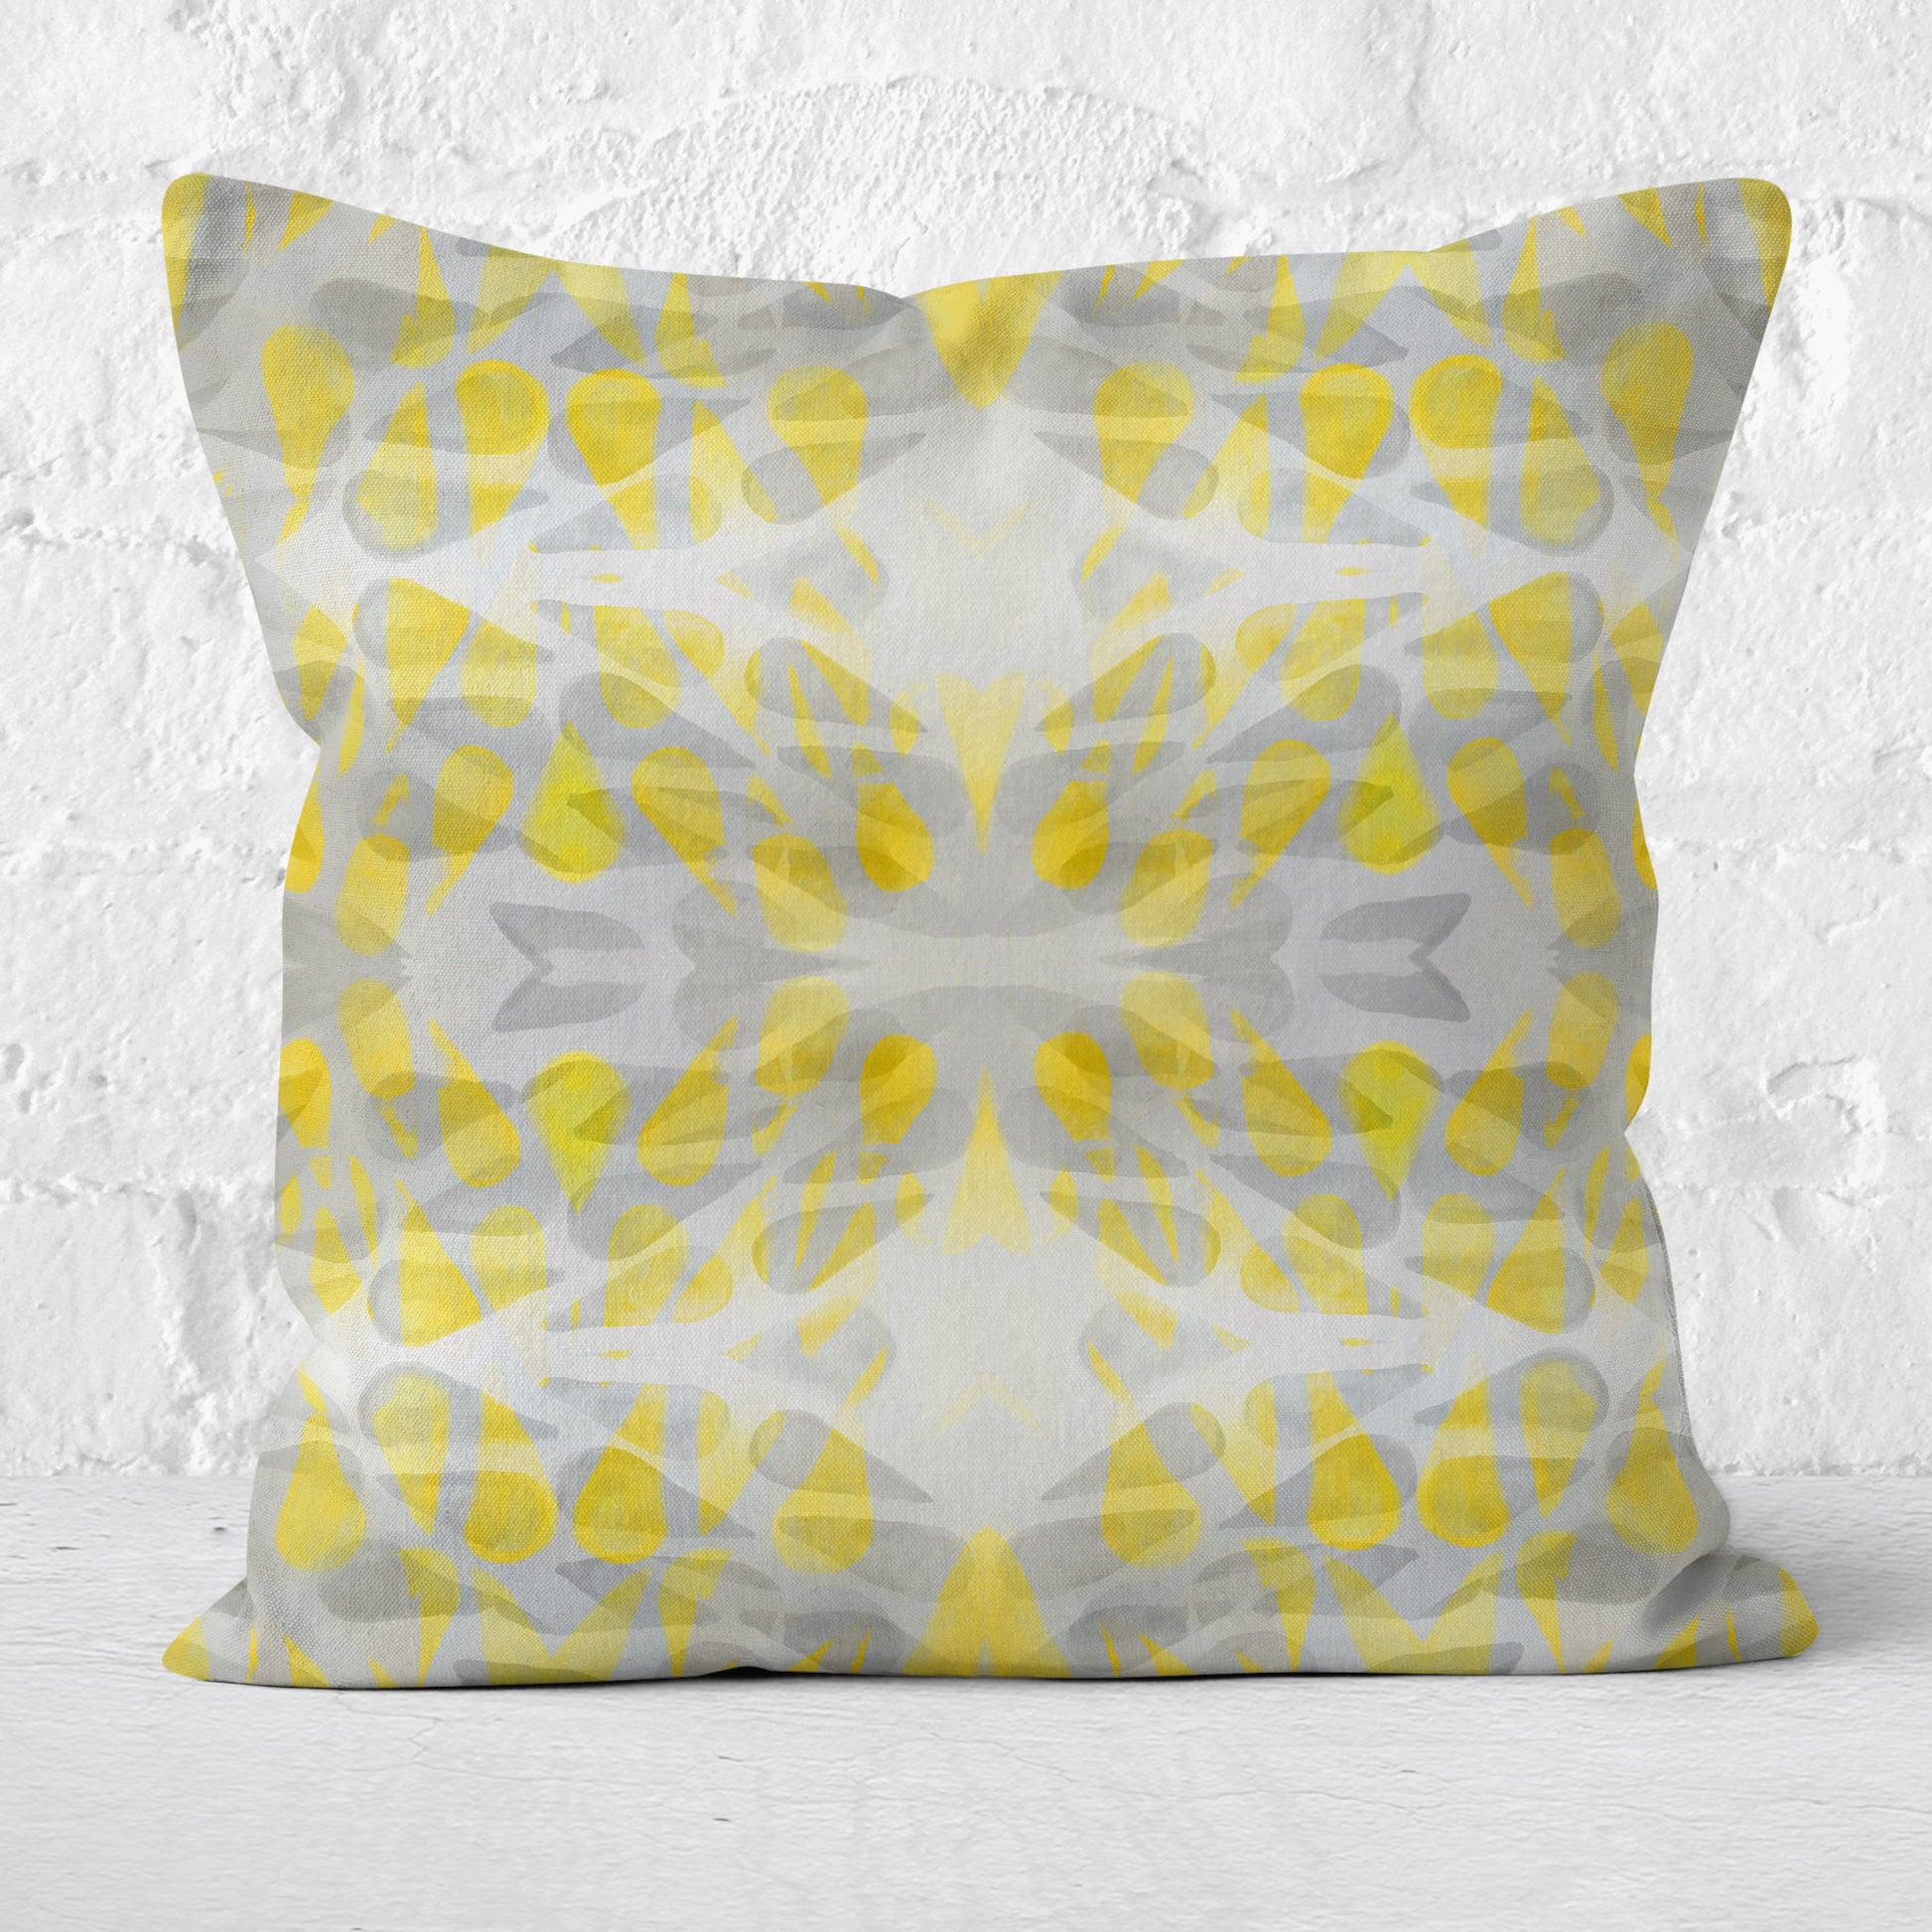 Throw pillow featuring abstract hand-painted pattern in yellow and grey.